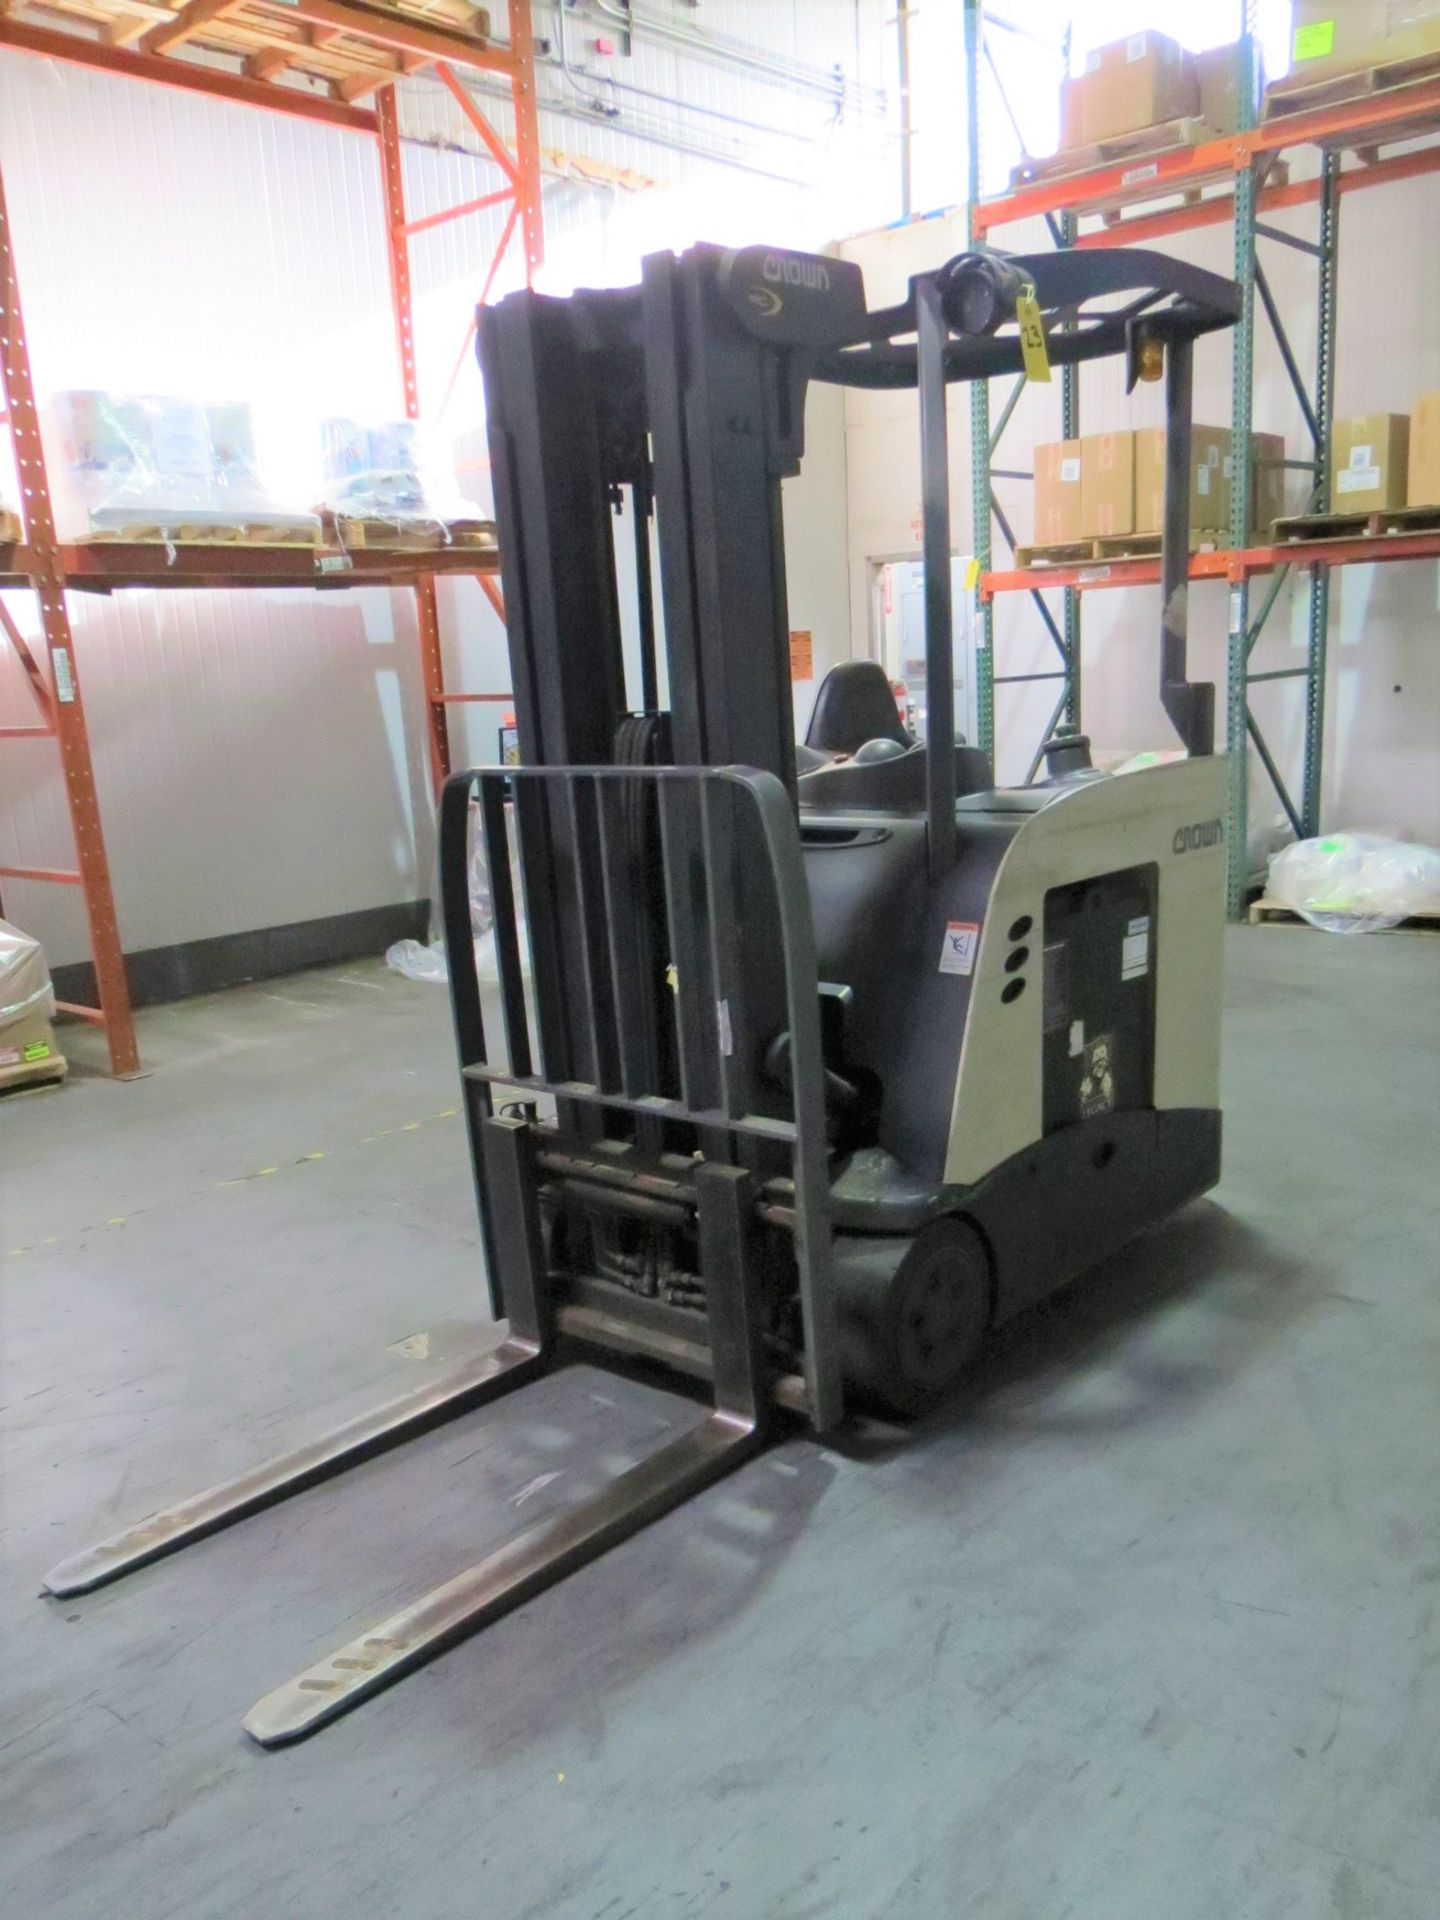 Crown S500 Series Electric Stand up Forklift, SN: 1A358015 with VFORCE V-HFM Series Battery Charger